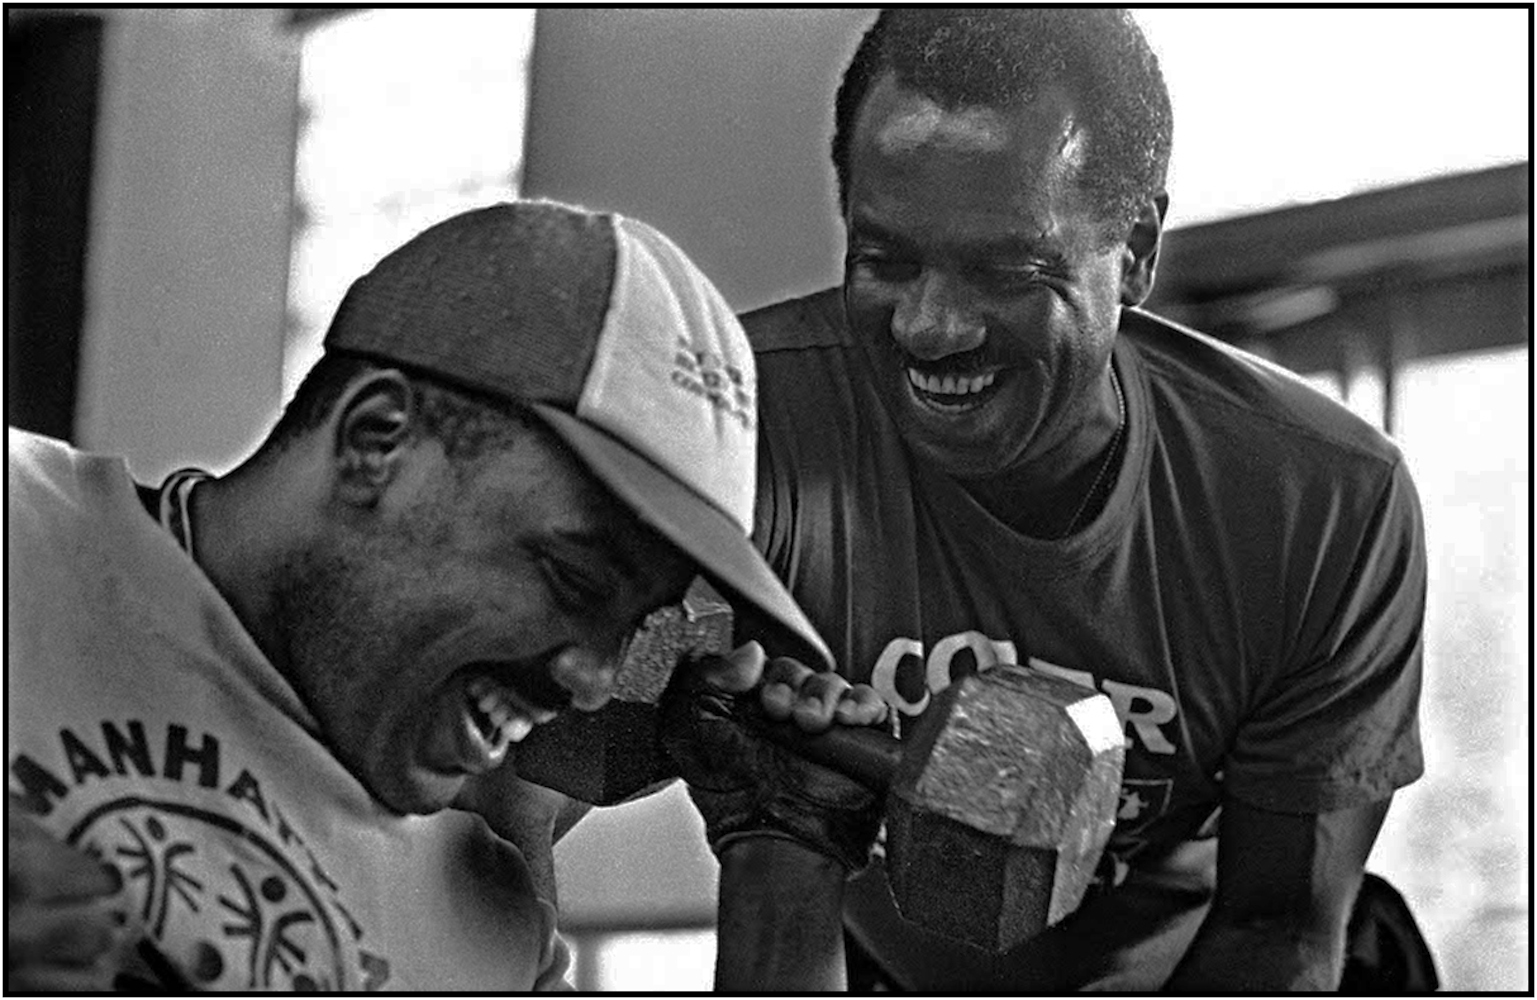   Special Olympics certified instructor and recreation worker, inspires disabled patient Juan Pimintel in wheelchair to lift weights at Coler Memorial Hospital on Roosevelt Island. &nbsp;1992.  